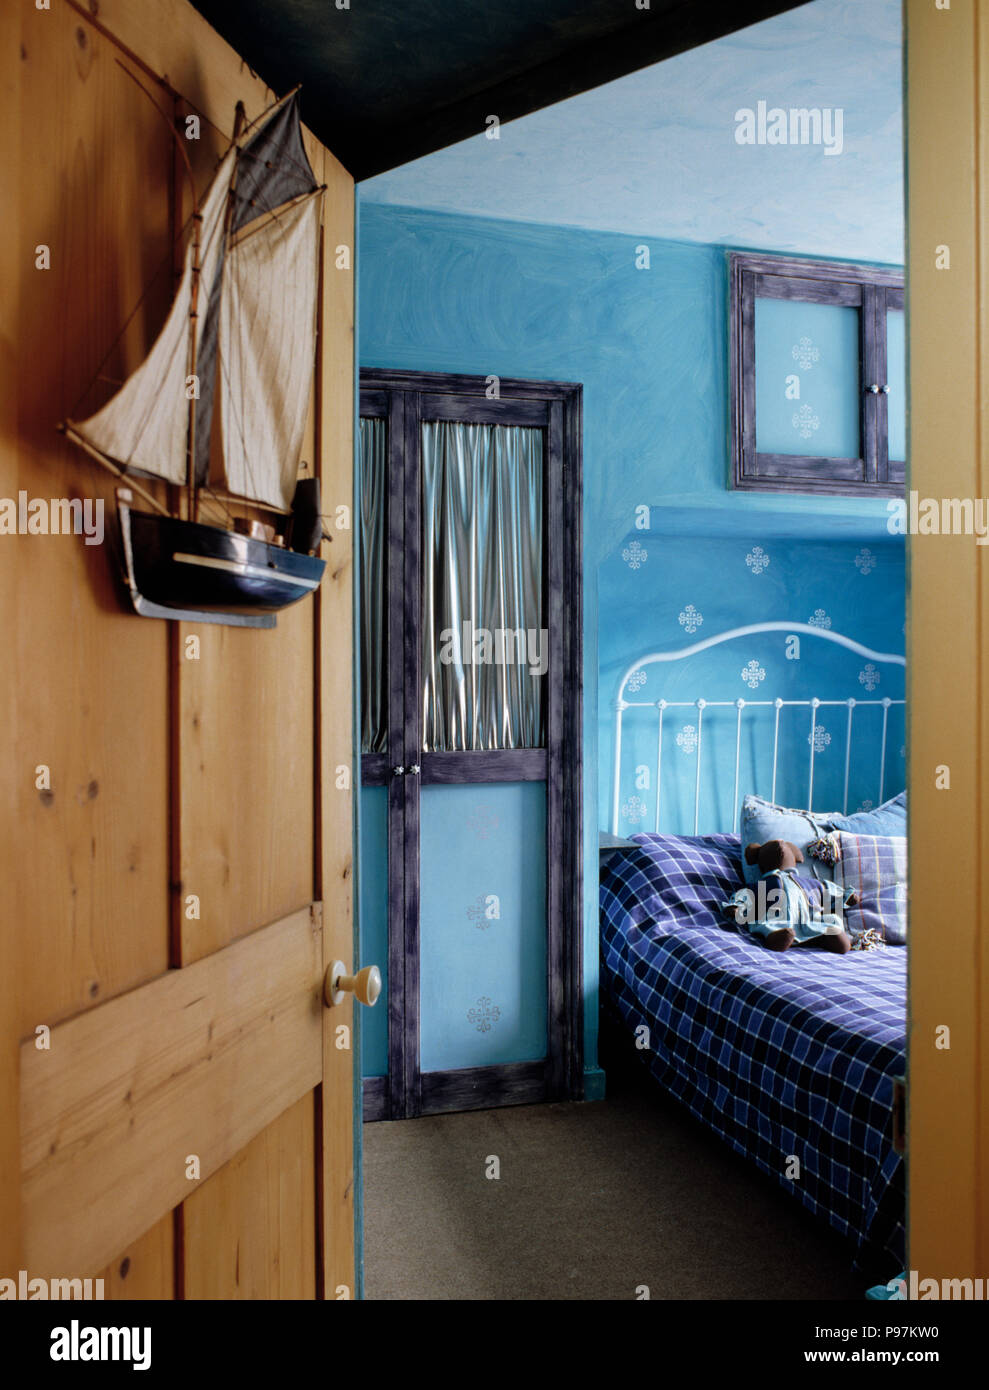 Open Pine Door To Child S Blue Bedroom With White Iron Bed